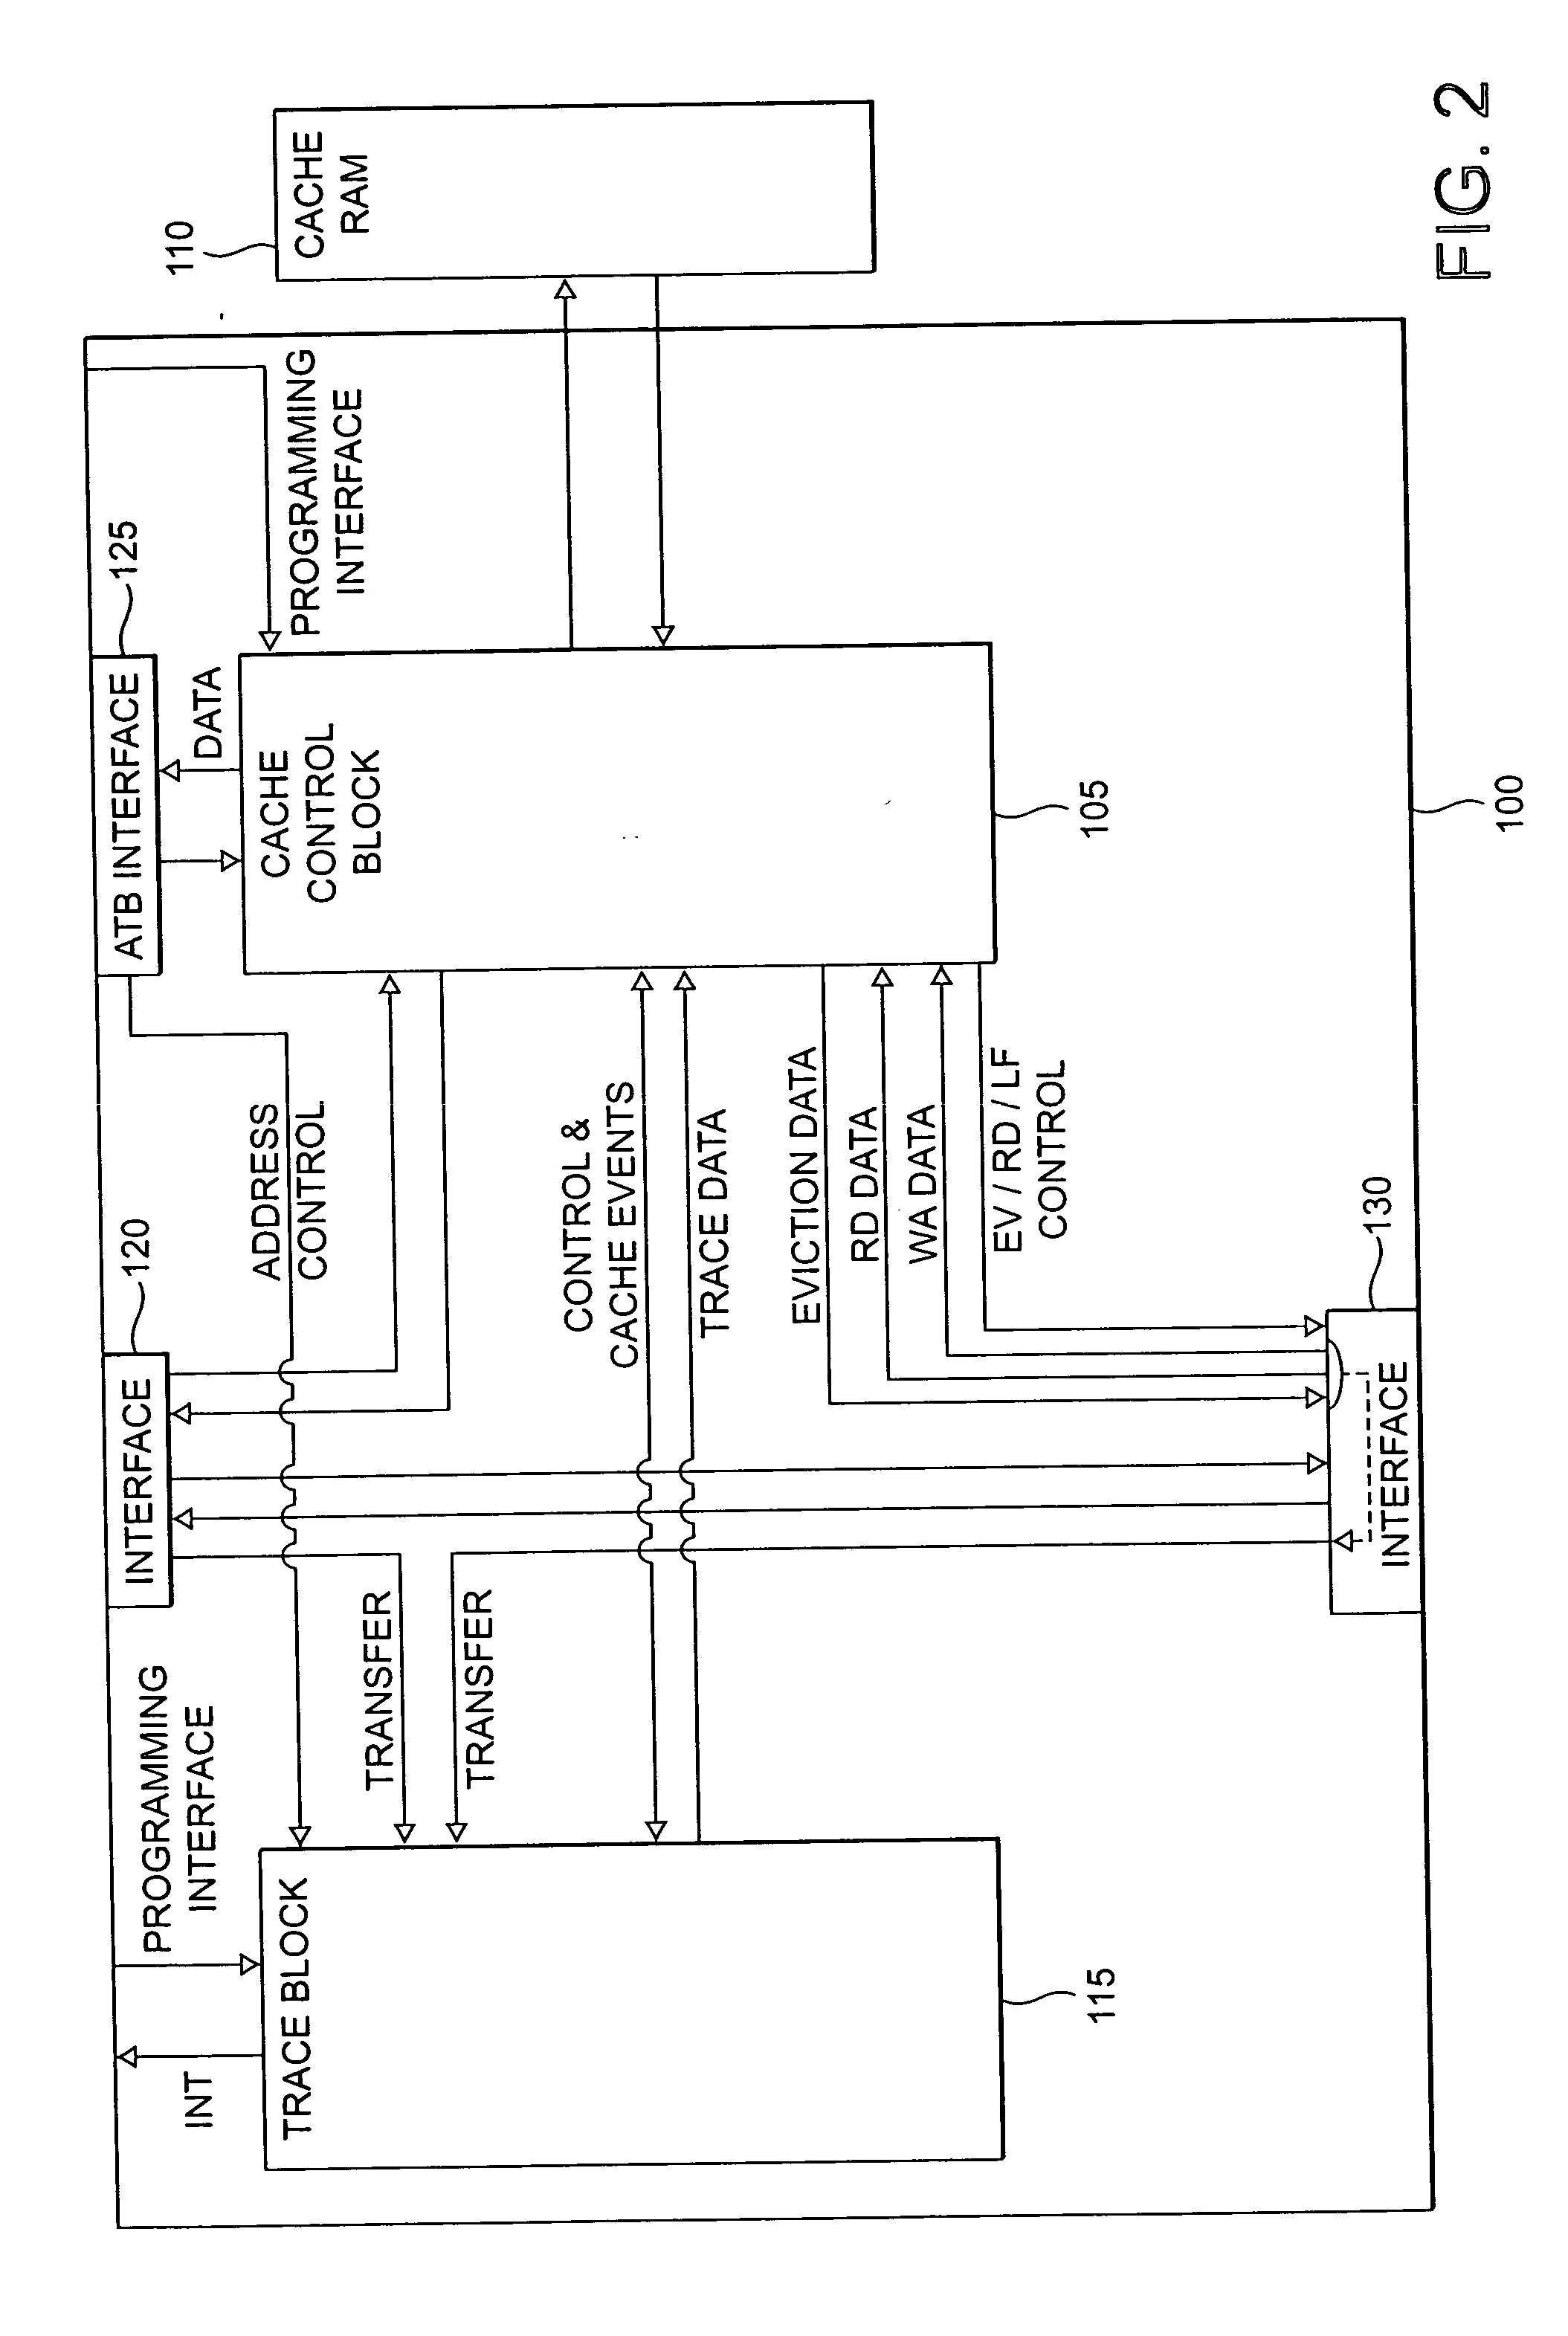 Storage of trace data within a data processing apparatus